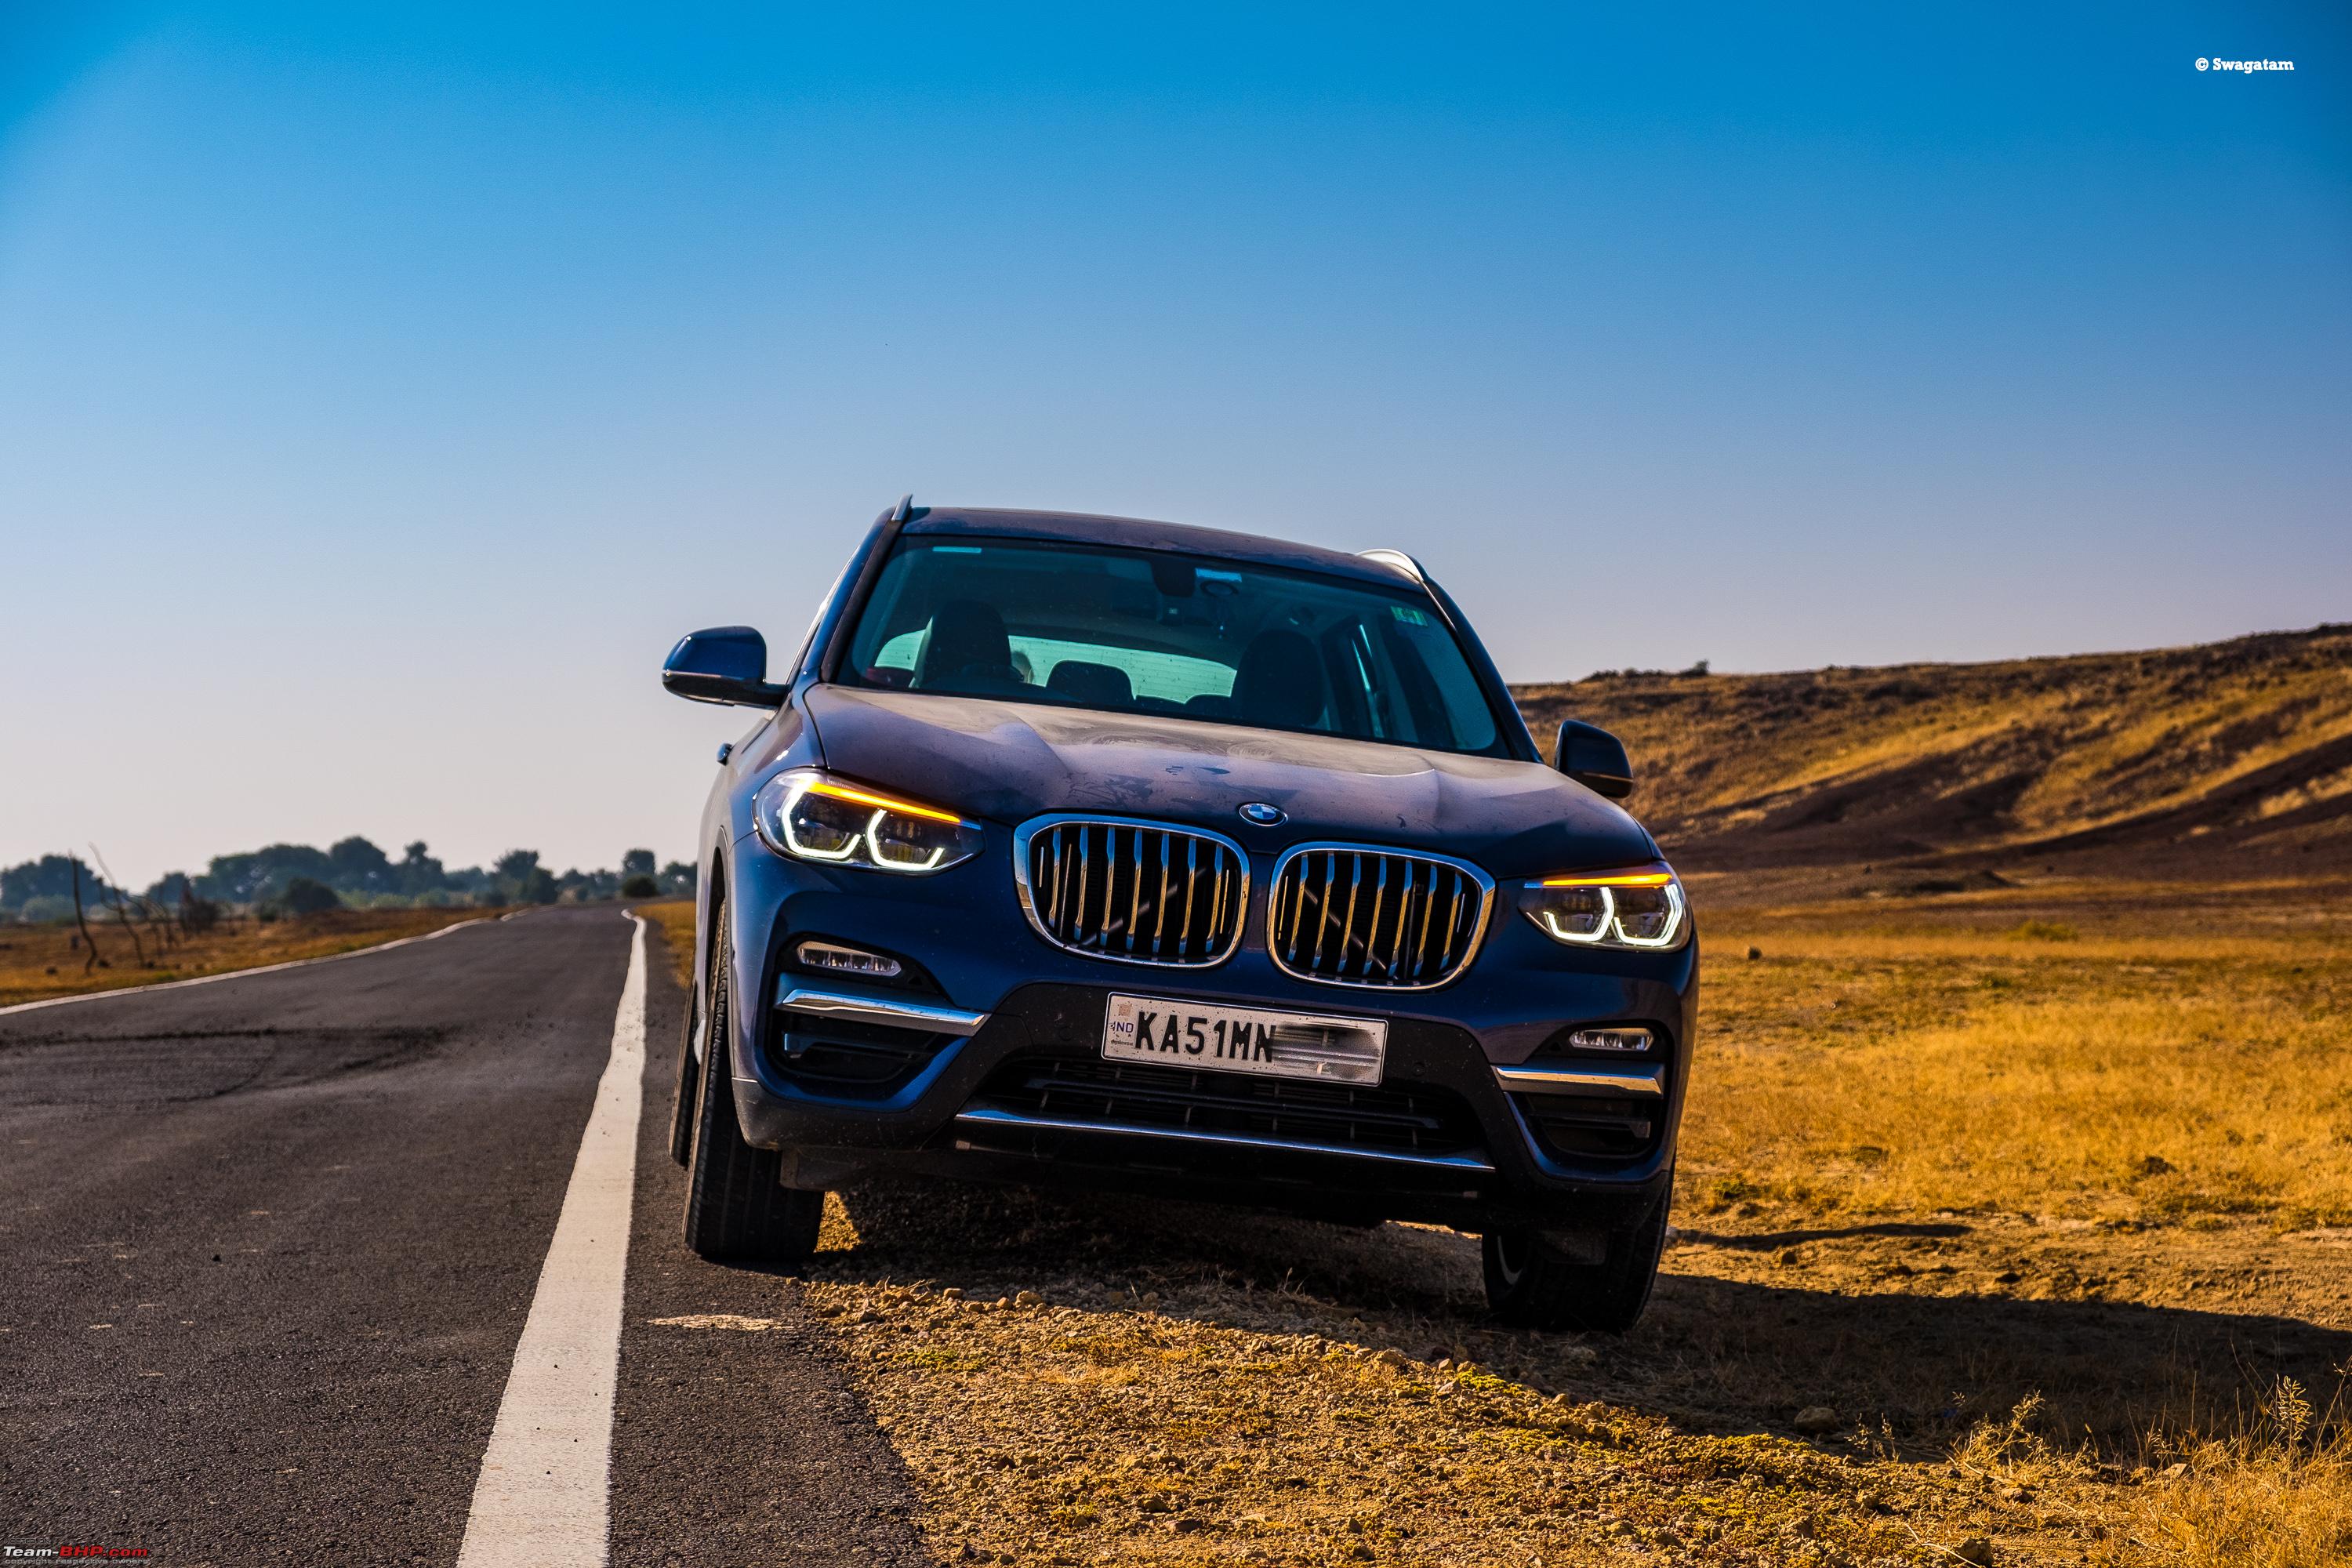 https://www.team-bhp.com/forum/attachments/test-drives-initial-ownership-reports/2225495d1635497813-dream-come-true-my-phytonic-blue-bmw-x3-g01-xdrive-20d-luxury-line-review-dscf22143.jpg